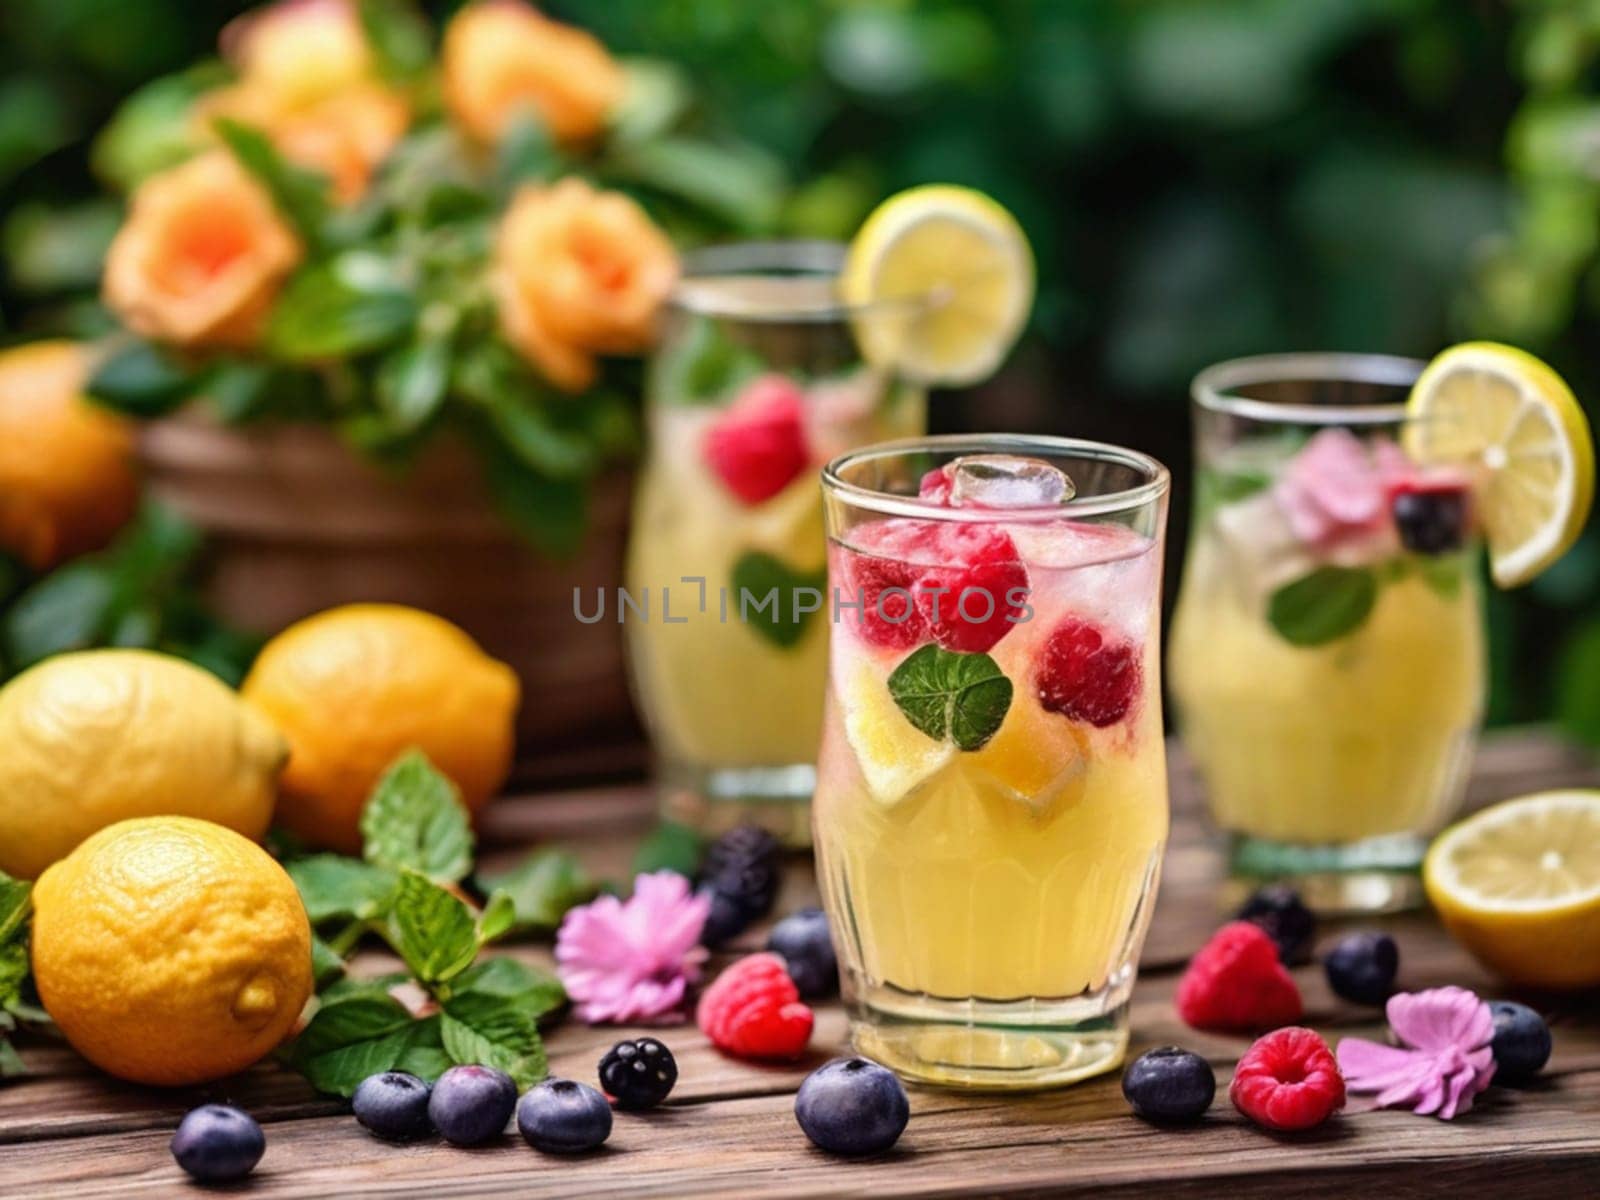 Glasses with fresh lemonade in summer greenery and flowers on a wooden table background, citrus and berry lemonade with raspberry ice frappe on a wooden tabletop on a summer garden background by Ekaterina34